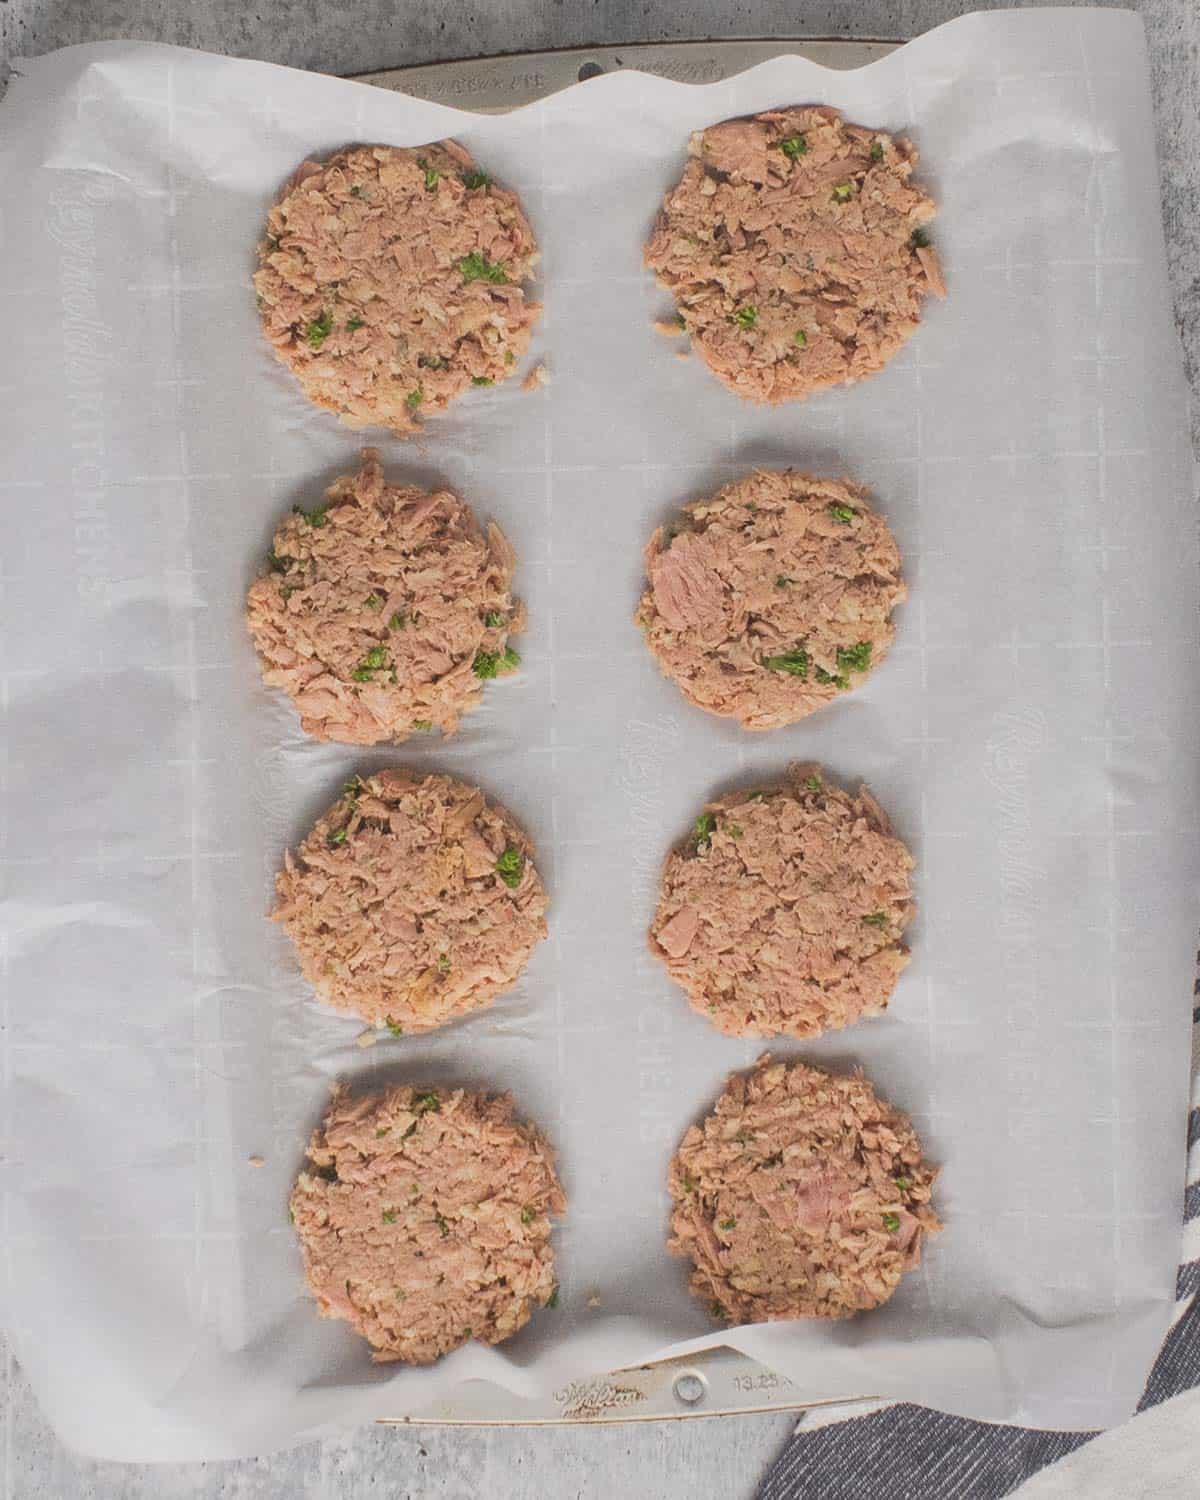 Tuna cakes formed on a lined parchment paper baking sheet.